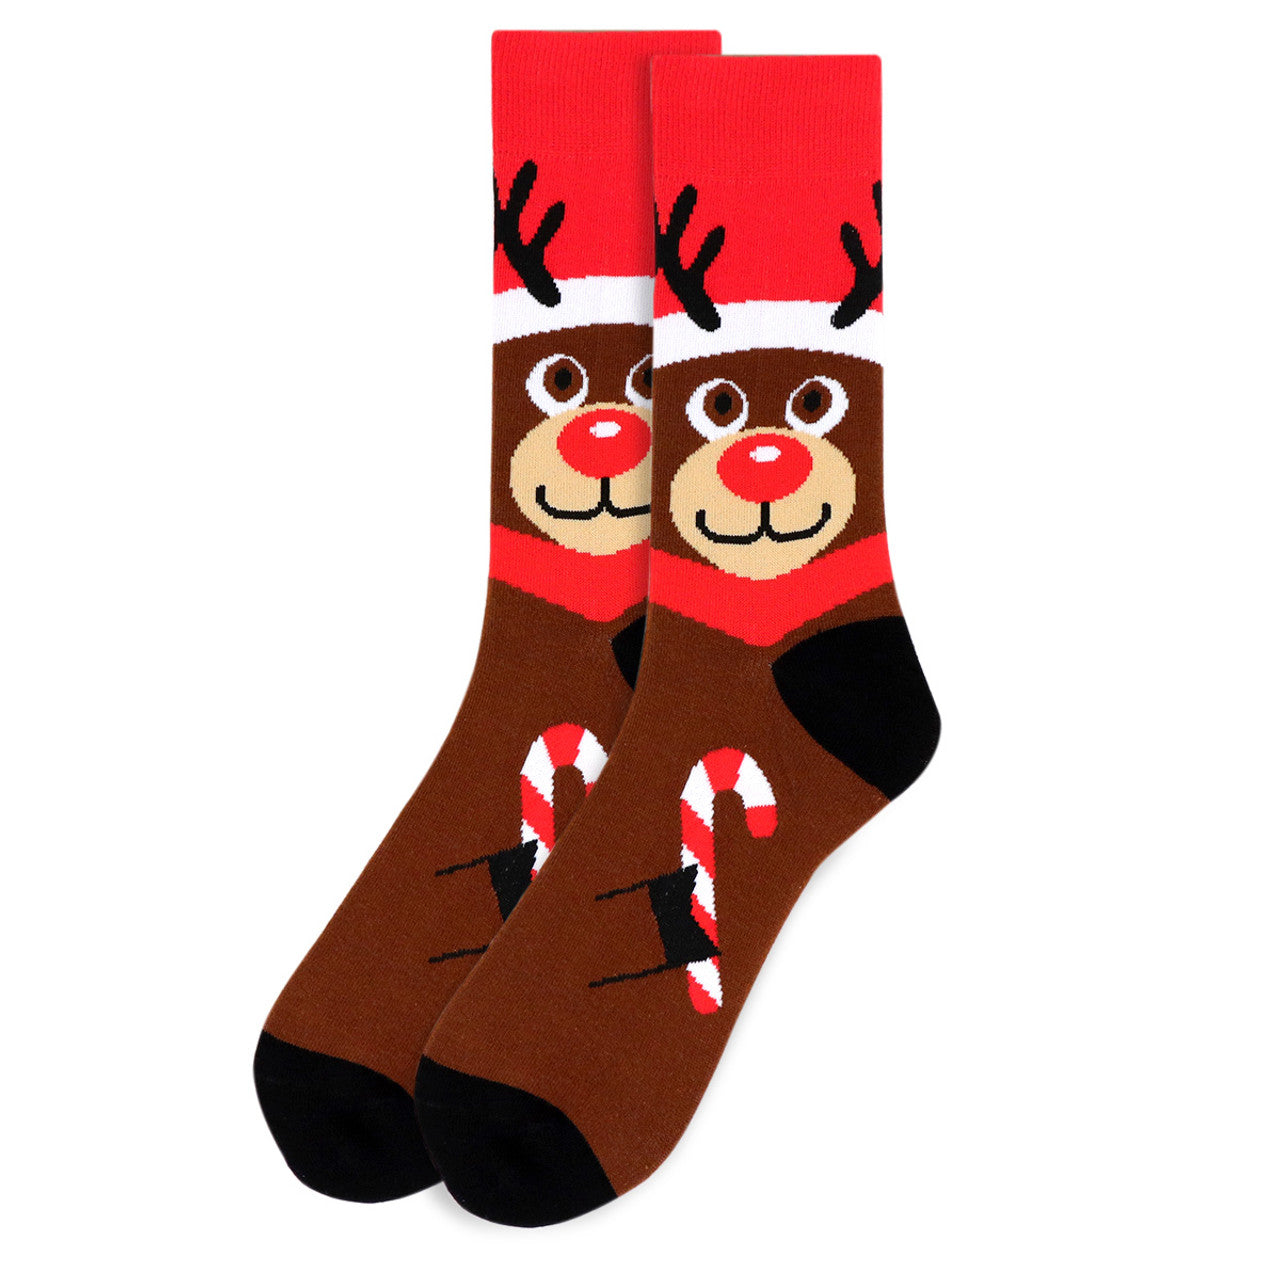 A pair of men's crew socks featuring a design inspired by Rudolph the Red-Nosed Reindeer. The socks have a brown base with Rudolph's face near the top, complete with a red nose, black eyes, and antlers. The toe and heel are black, and there are candy cane motifs on the foot. The top of the socks is red with a white band, resembling Rudolph's festive hat.